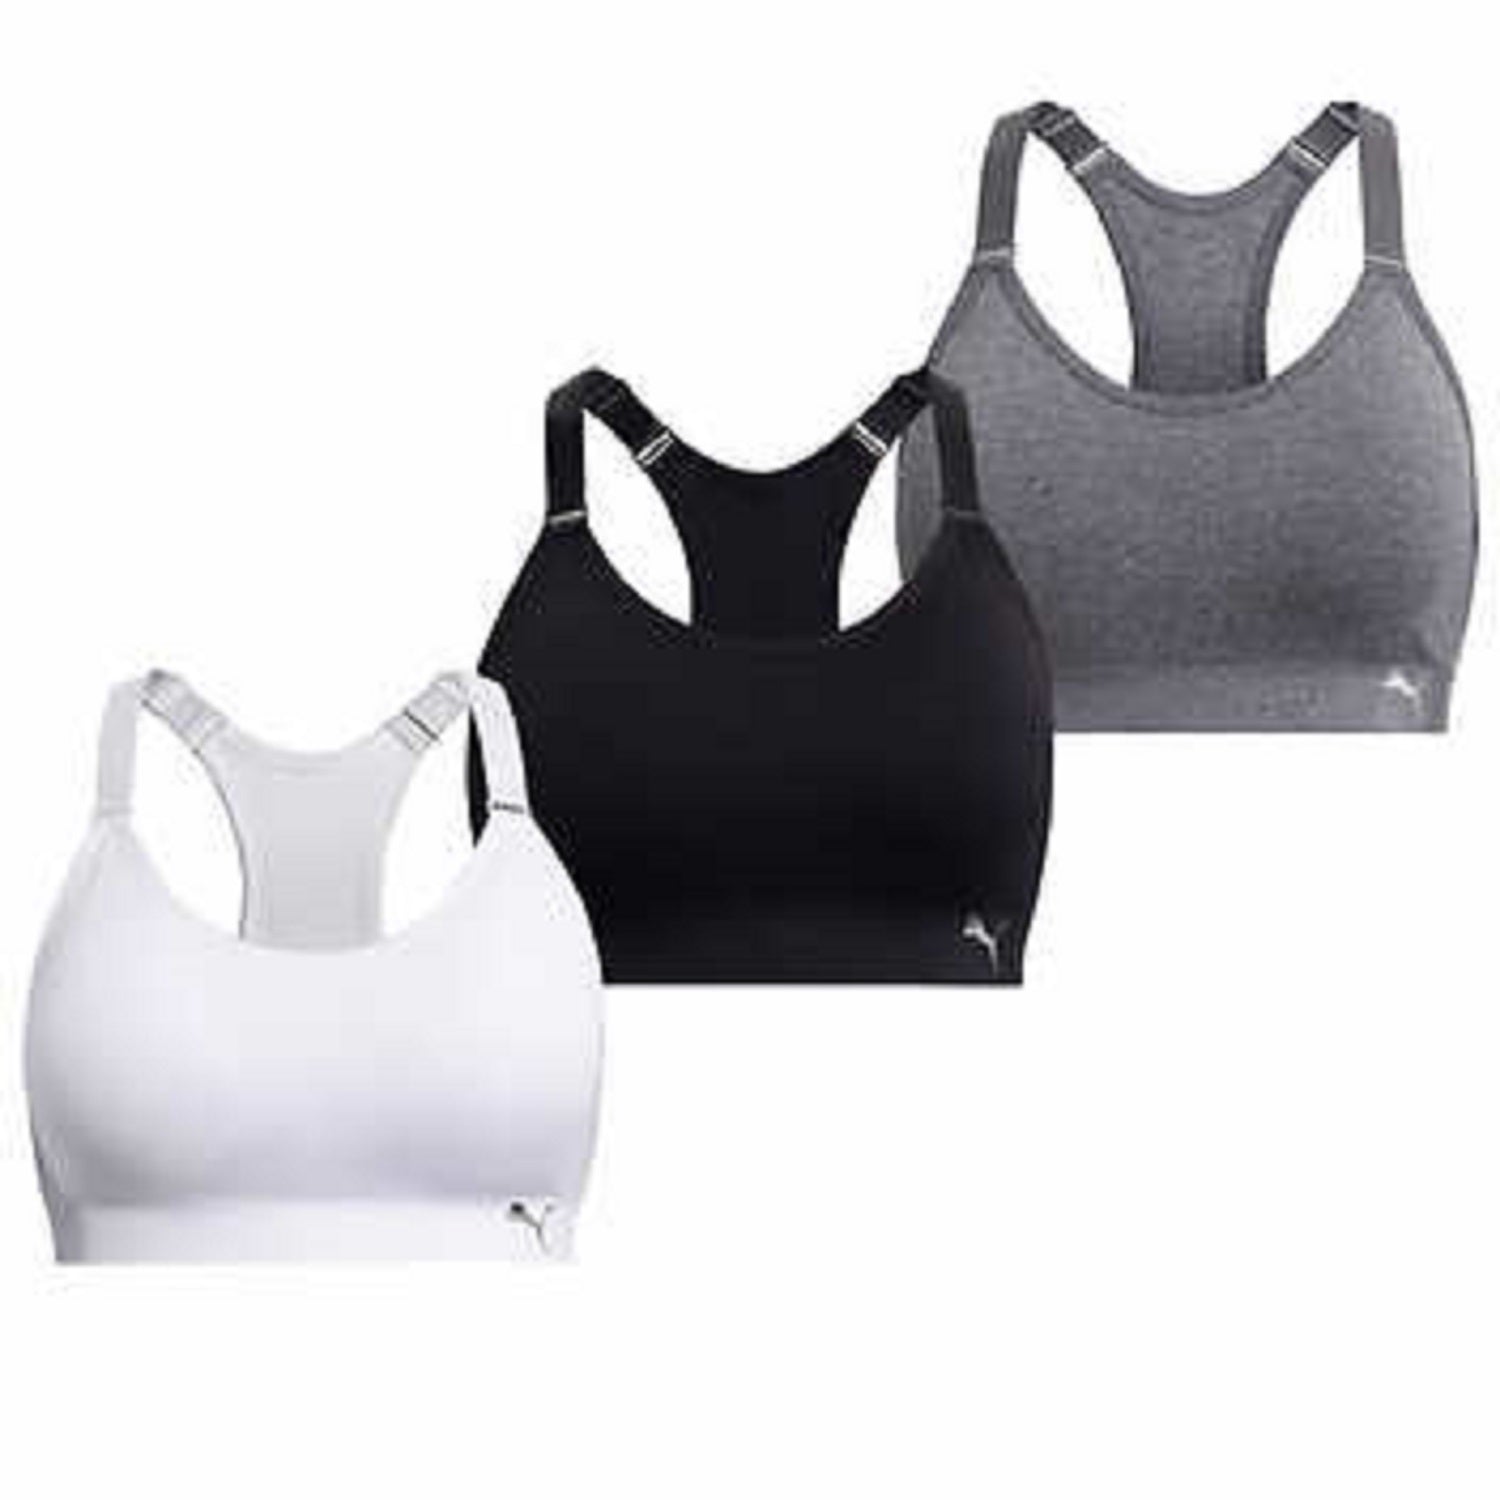 Puma Women's Seamless Sports Bra with Removable Cups 